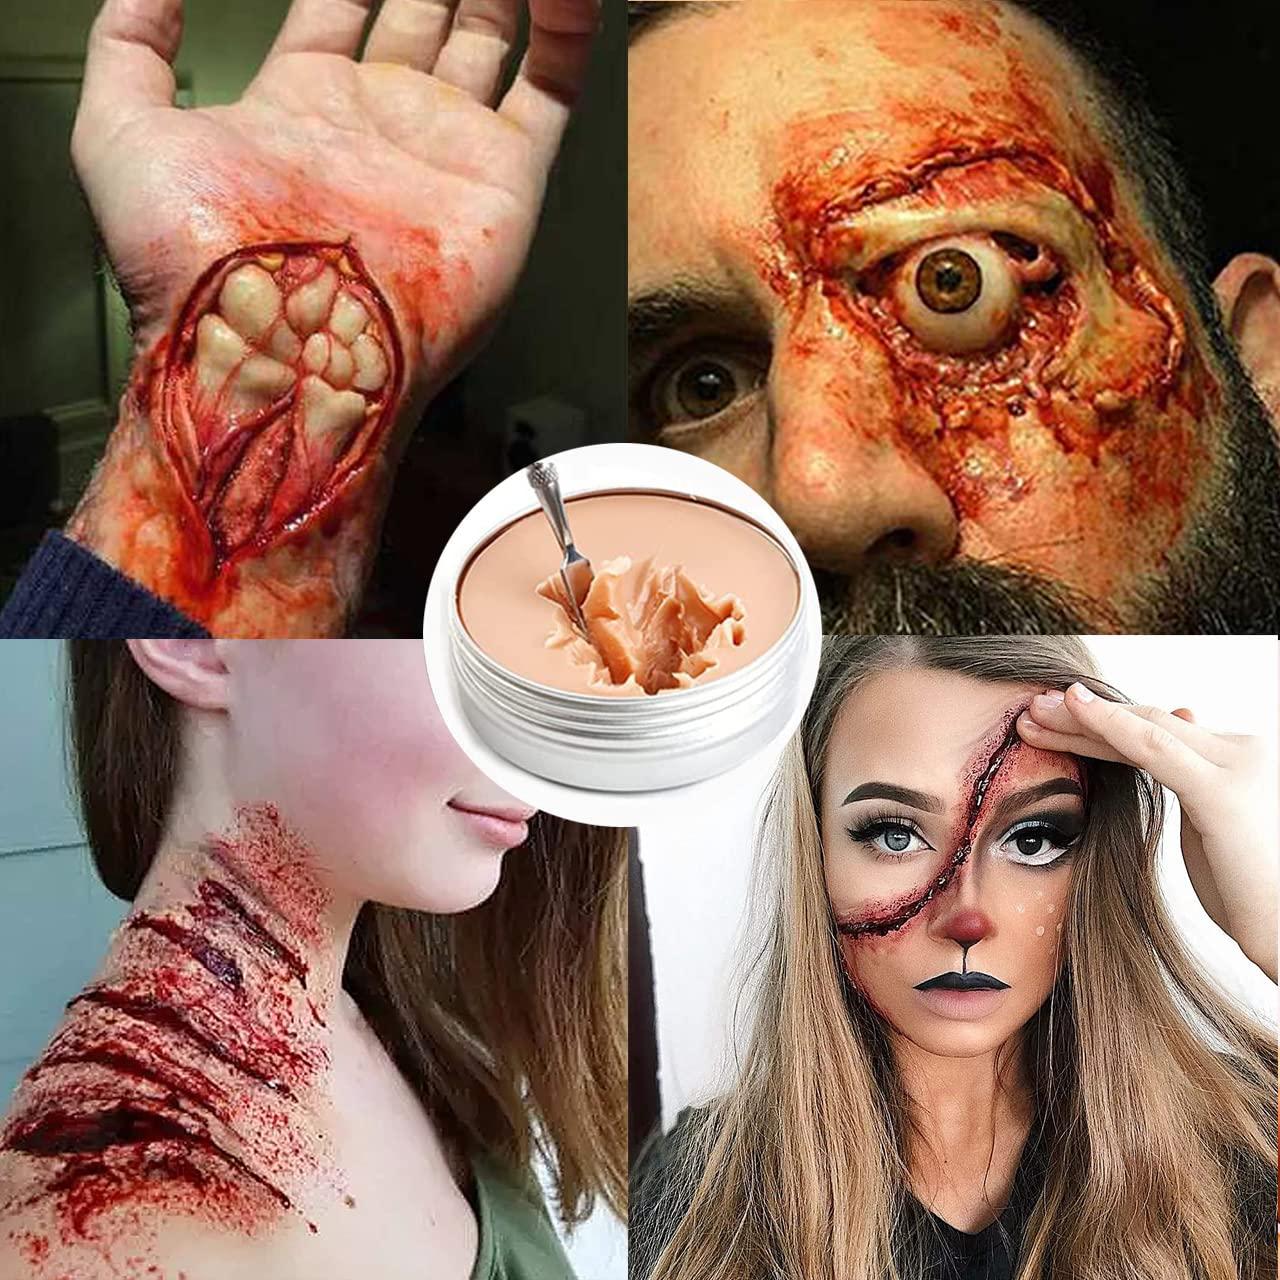 YiFudd SFX Makeup Kit - Vampire Blood and Scar Wax Kit,Fake Wound Modeling  Scar for Face Paint Makeup Wax, Make Specail Effects Makeup Set For